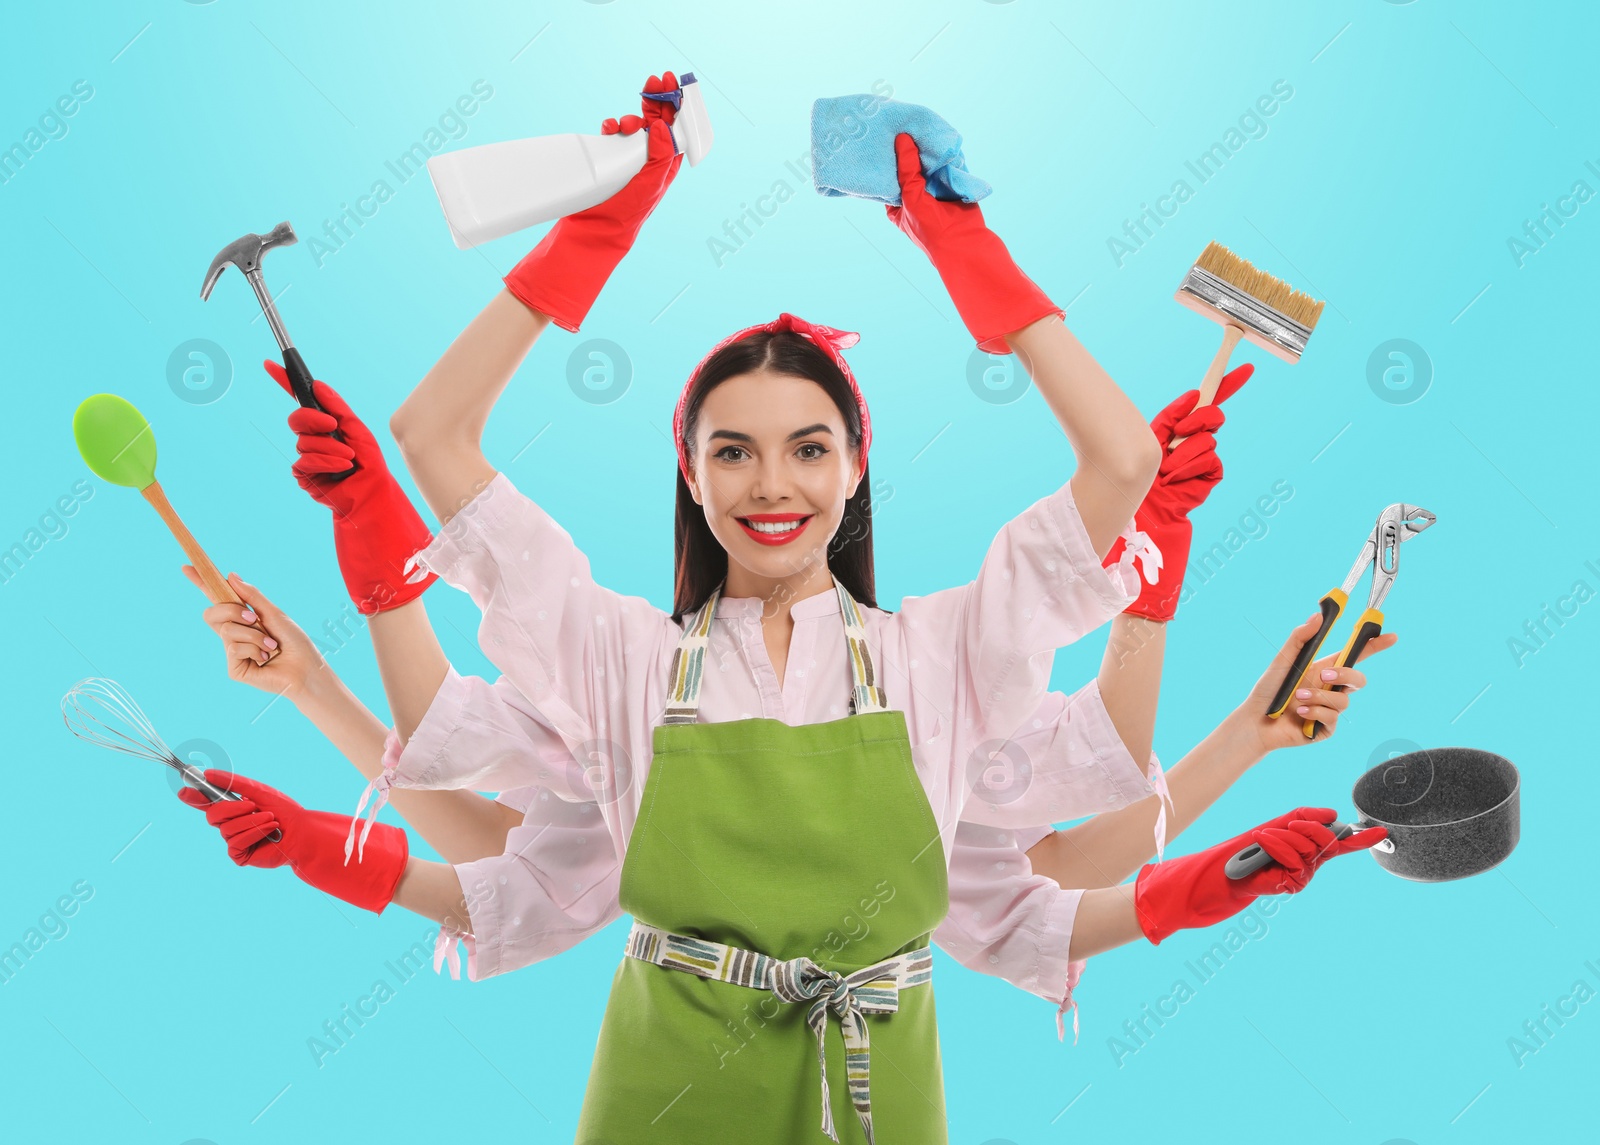 Image of Multitask housewife with many hands holding different stuff on blue background